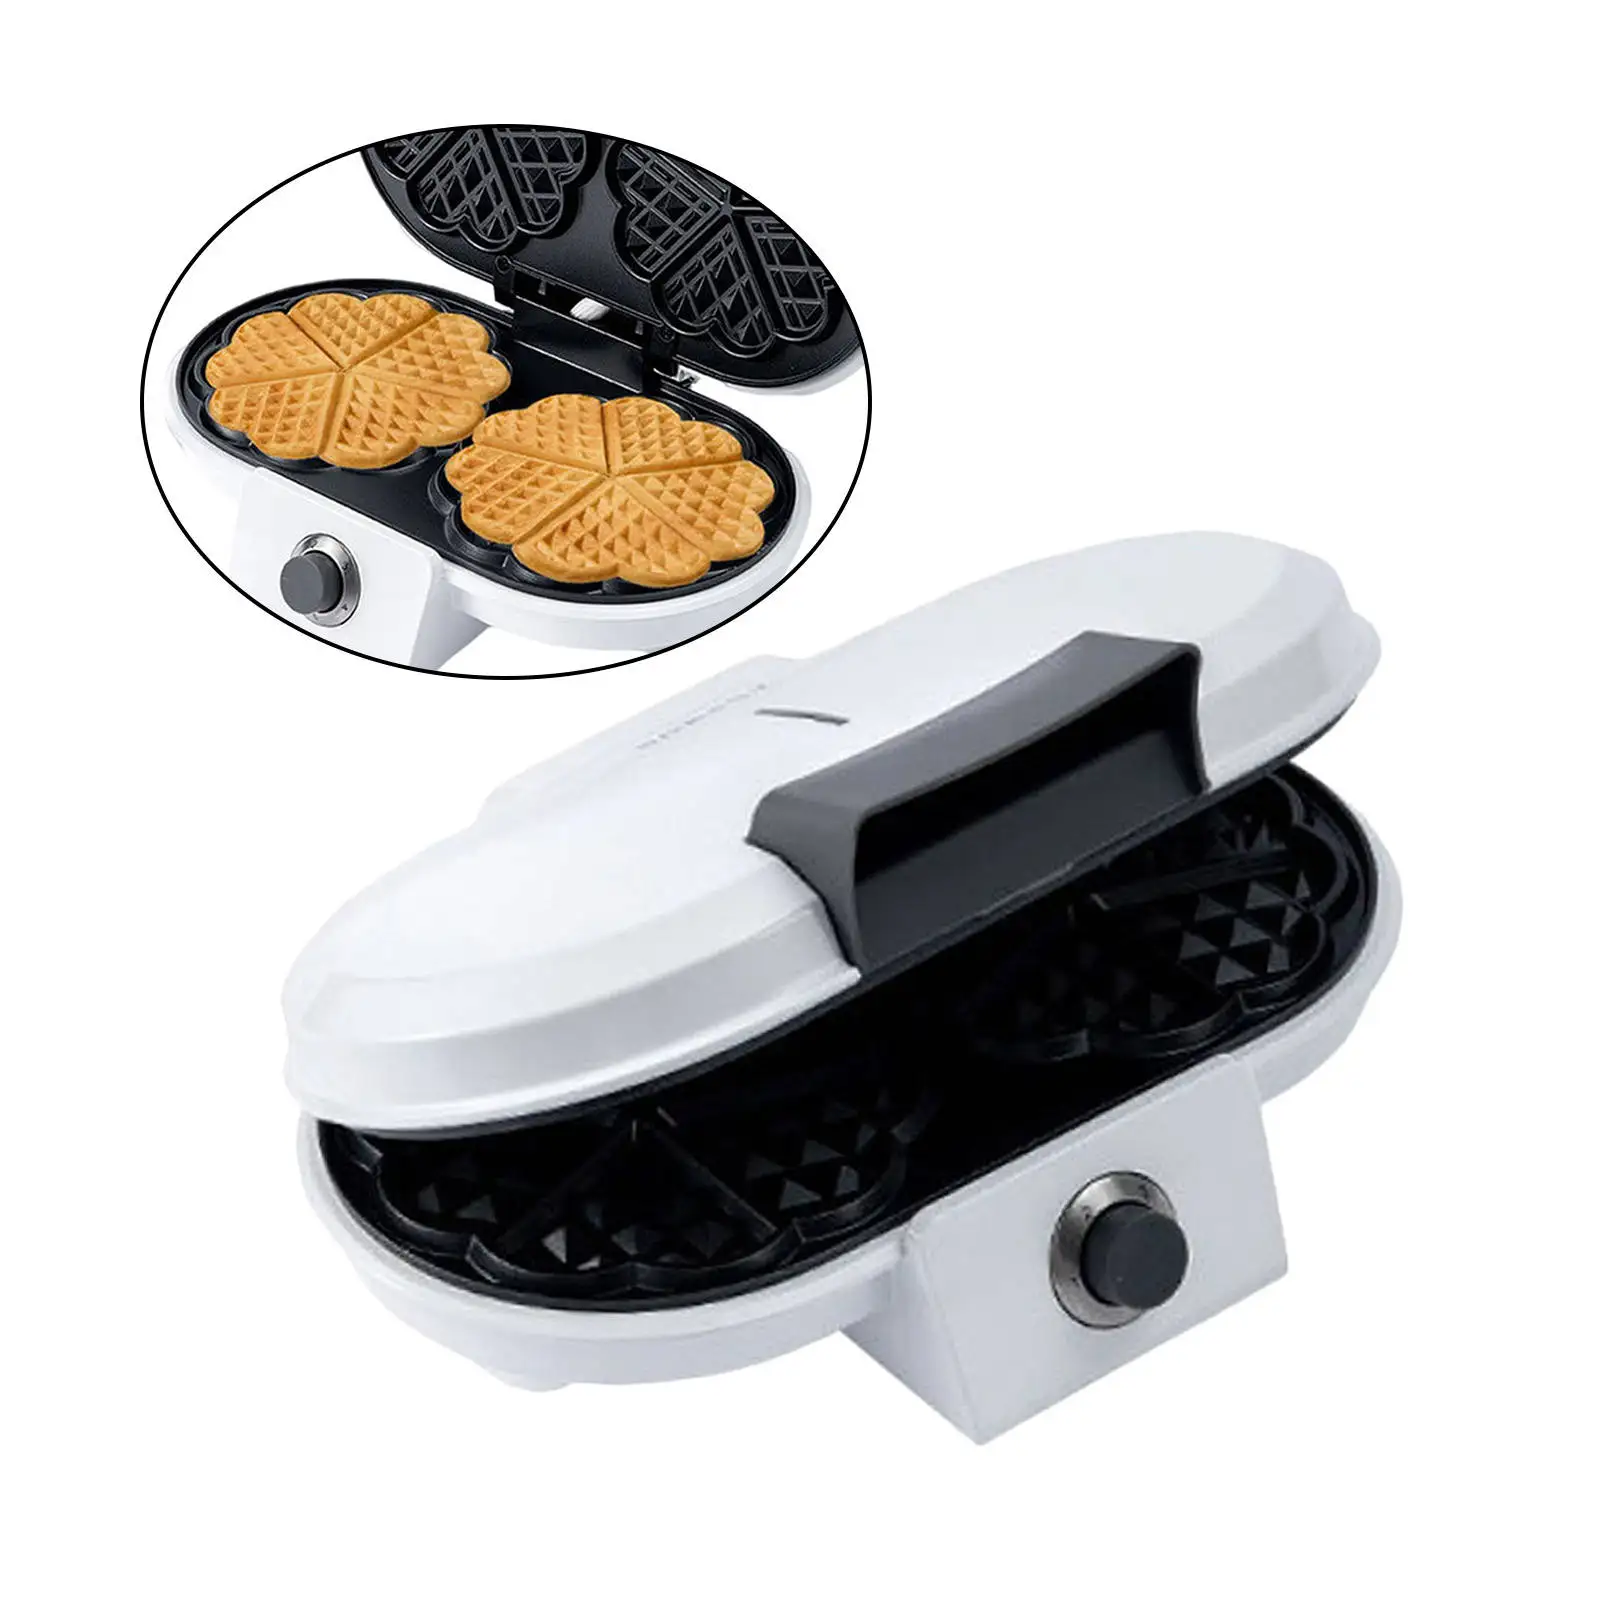 

Waffle Maker Non Stick Waffle Baking Mould 1000W Pastries Pan Pancake Cooking Bread Waffle Making for Breakfast Homemade